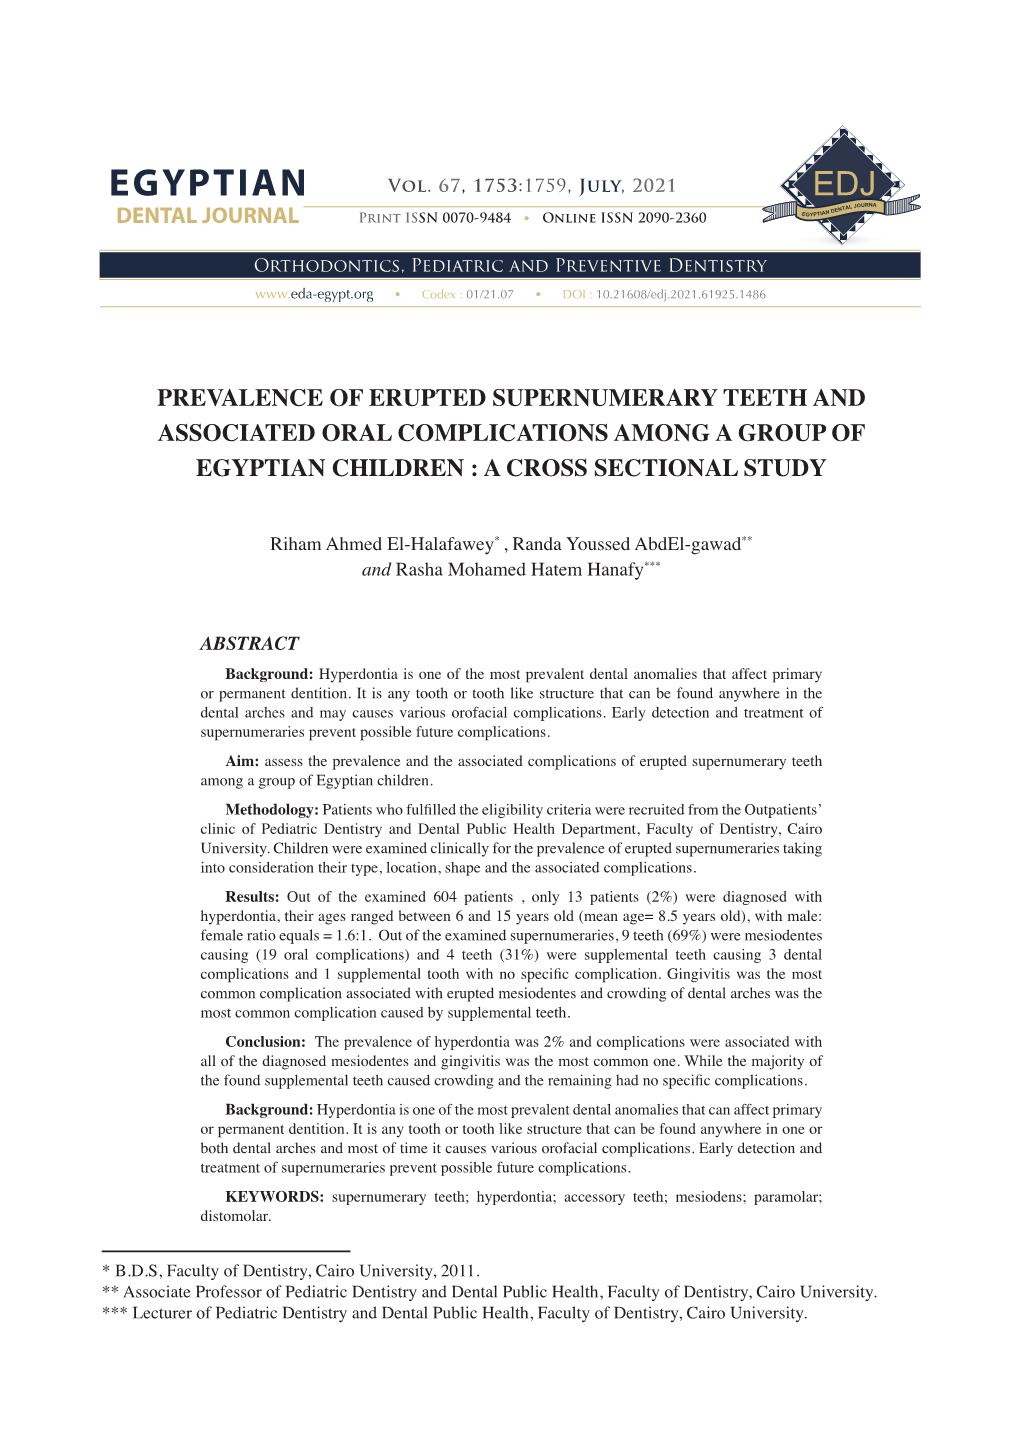 Prevalence of Erupted Supernumerary Teeth and Associated Oral Complications Among a Group of Egyptian Children : a Cross Sectional Study